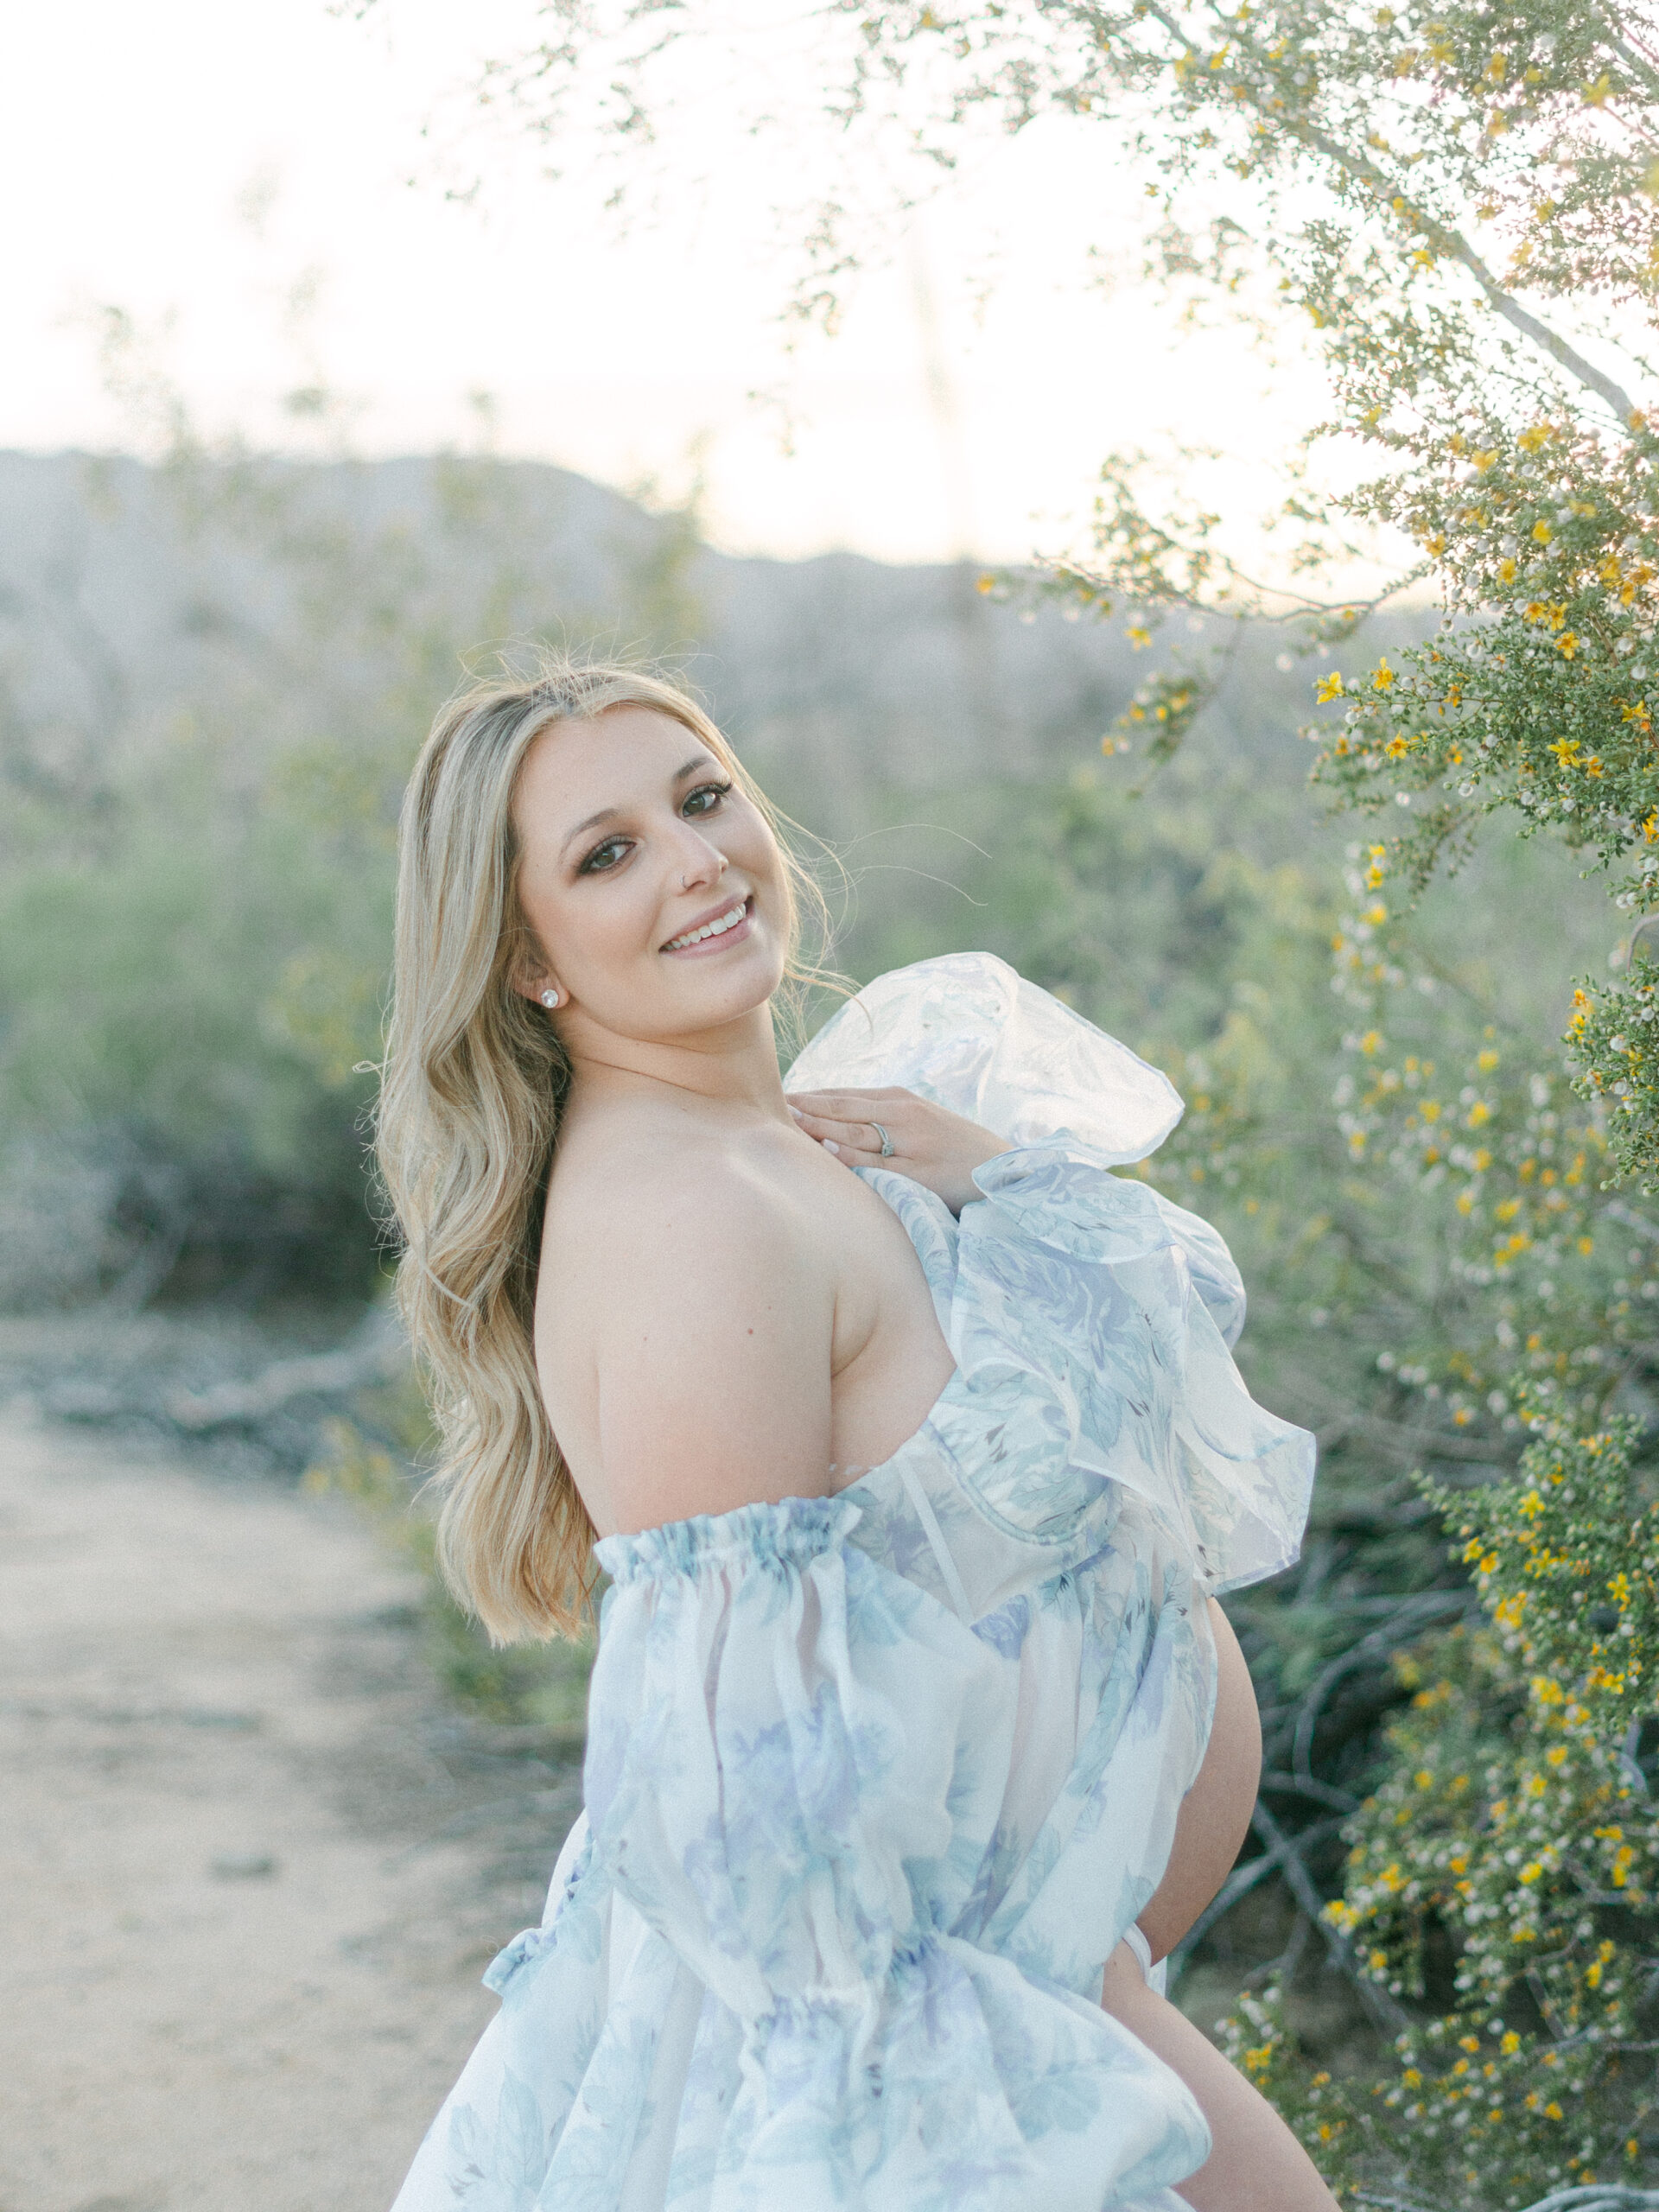 MATERNITY SESSION AT OASIS OF MARA IN TWENTYNINE PALMS, CALIFORNIA BY ELIZABETH KANE PHOTOGRAPHY